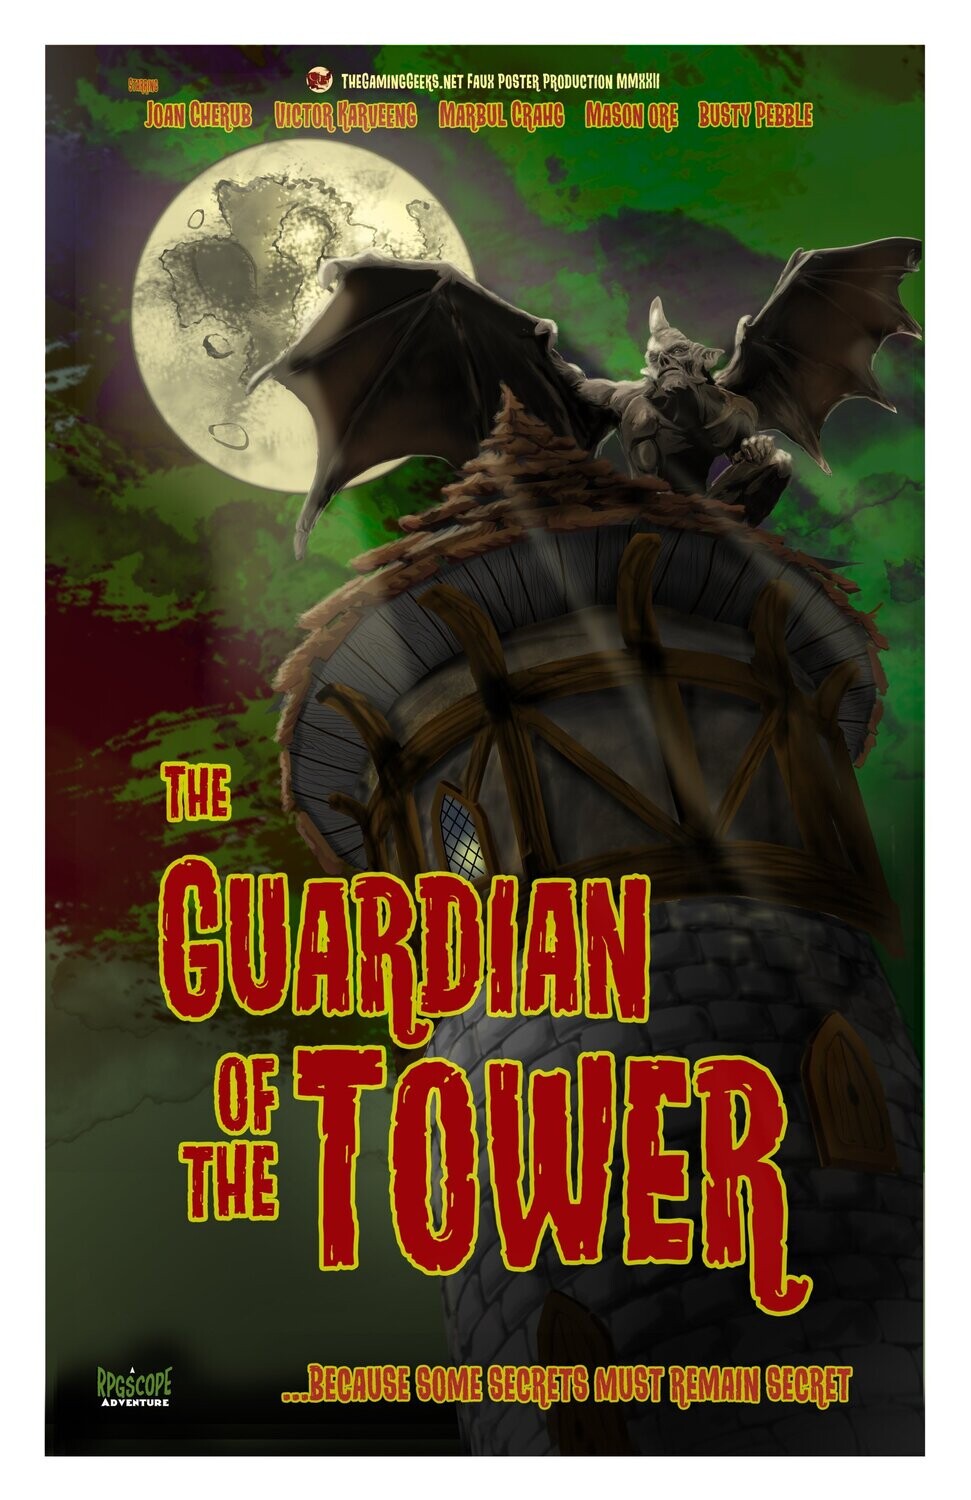 The Guardian of the Tower!